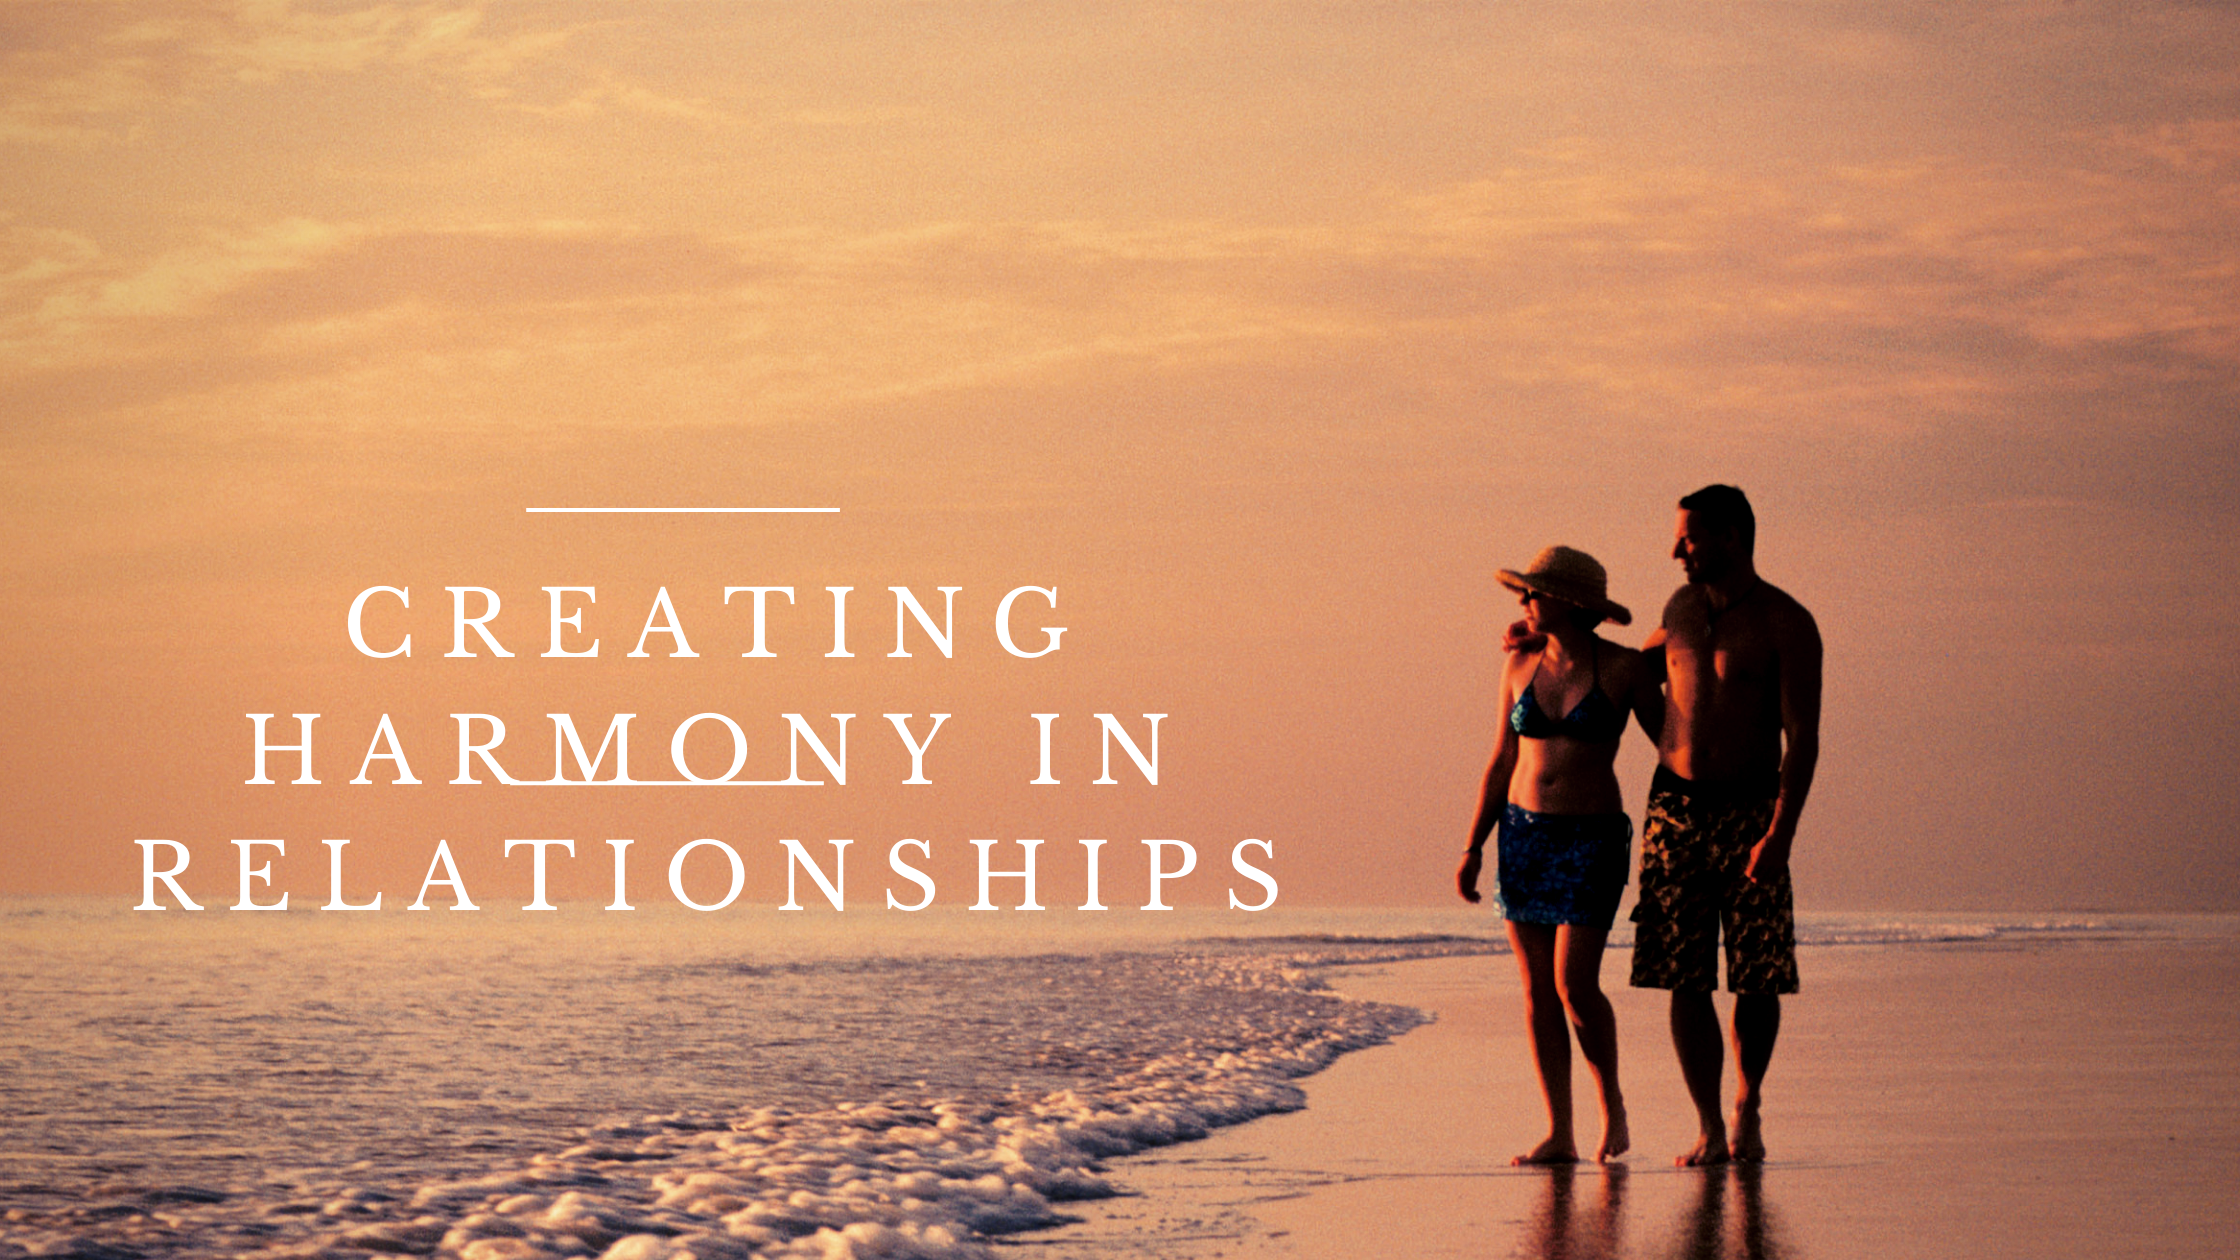 Be First In Creating Harmony In Relationships